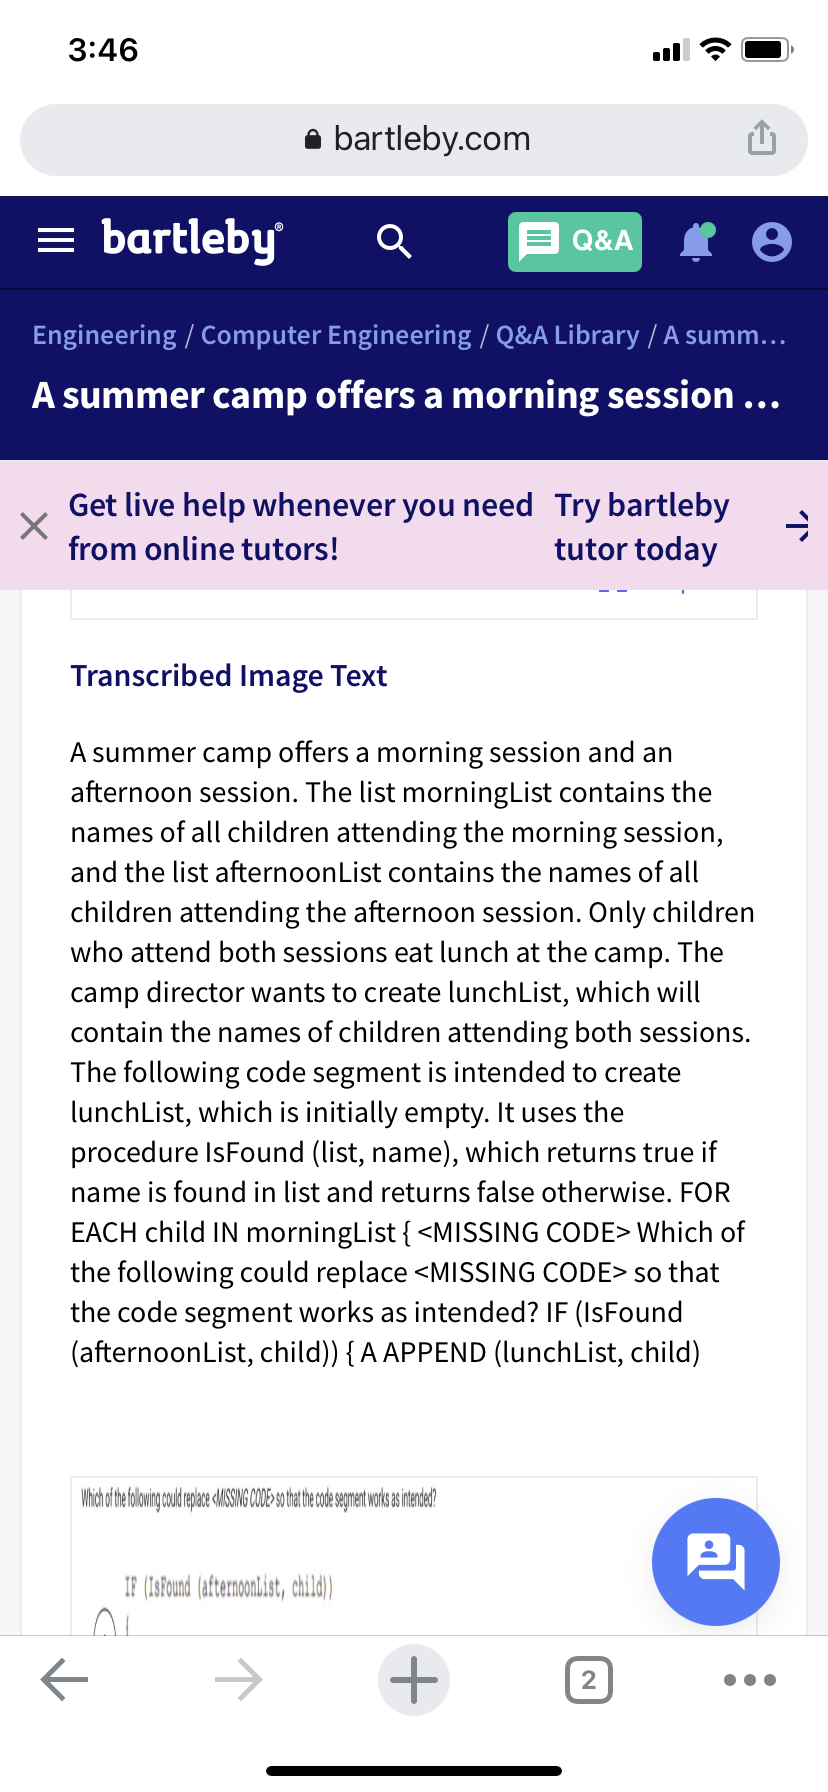 3:46
bartleby.com
bartleby
Q&A
Engineering / Computer Engineering / Q&A Library / A summ...
A summer camp offers a morning session ...
Get live help whenever you need Try bartleby
tutor today
from online tutors!
Transcribed Image Text
A summer camp offers a morning session and an
afternoon session. The list morningList contains the
names of all children attending the morning session,
and the list afternoonList contains the names of all
children attending the afternoon session. Only children
who attend both sessions eat lunch at the camp. The
camp director wants to create lunchList, which will
contain the names of children attending both sessions.
The following code segment is intended to create
lunchList, which is initially empty. It uses the
procedure IsFound (list, name), which returns true if
name is found in list and returns false otherwise. FOR
EACH child IN morningList { <MISSING CODE> Which of
the following could replace <MISSING CODE> so that
the code segment works as intended? IF (IsFound
(afternoonList, child)) { A APPEND (lunchList, child)
IF (1SFound (afternoonlist, child)
->
2)
